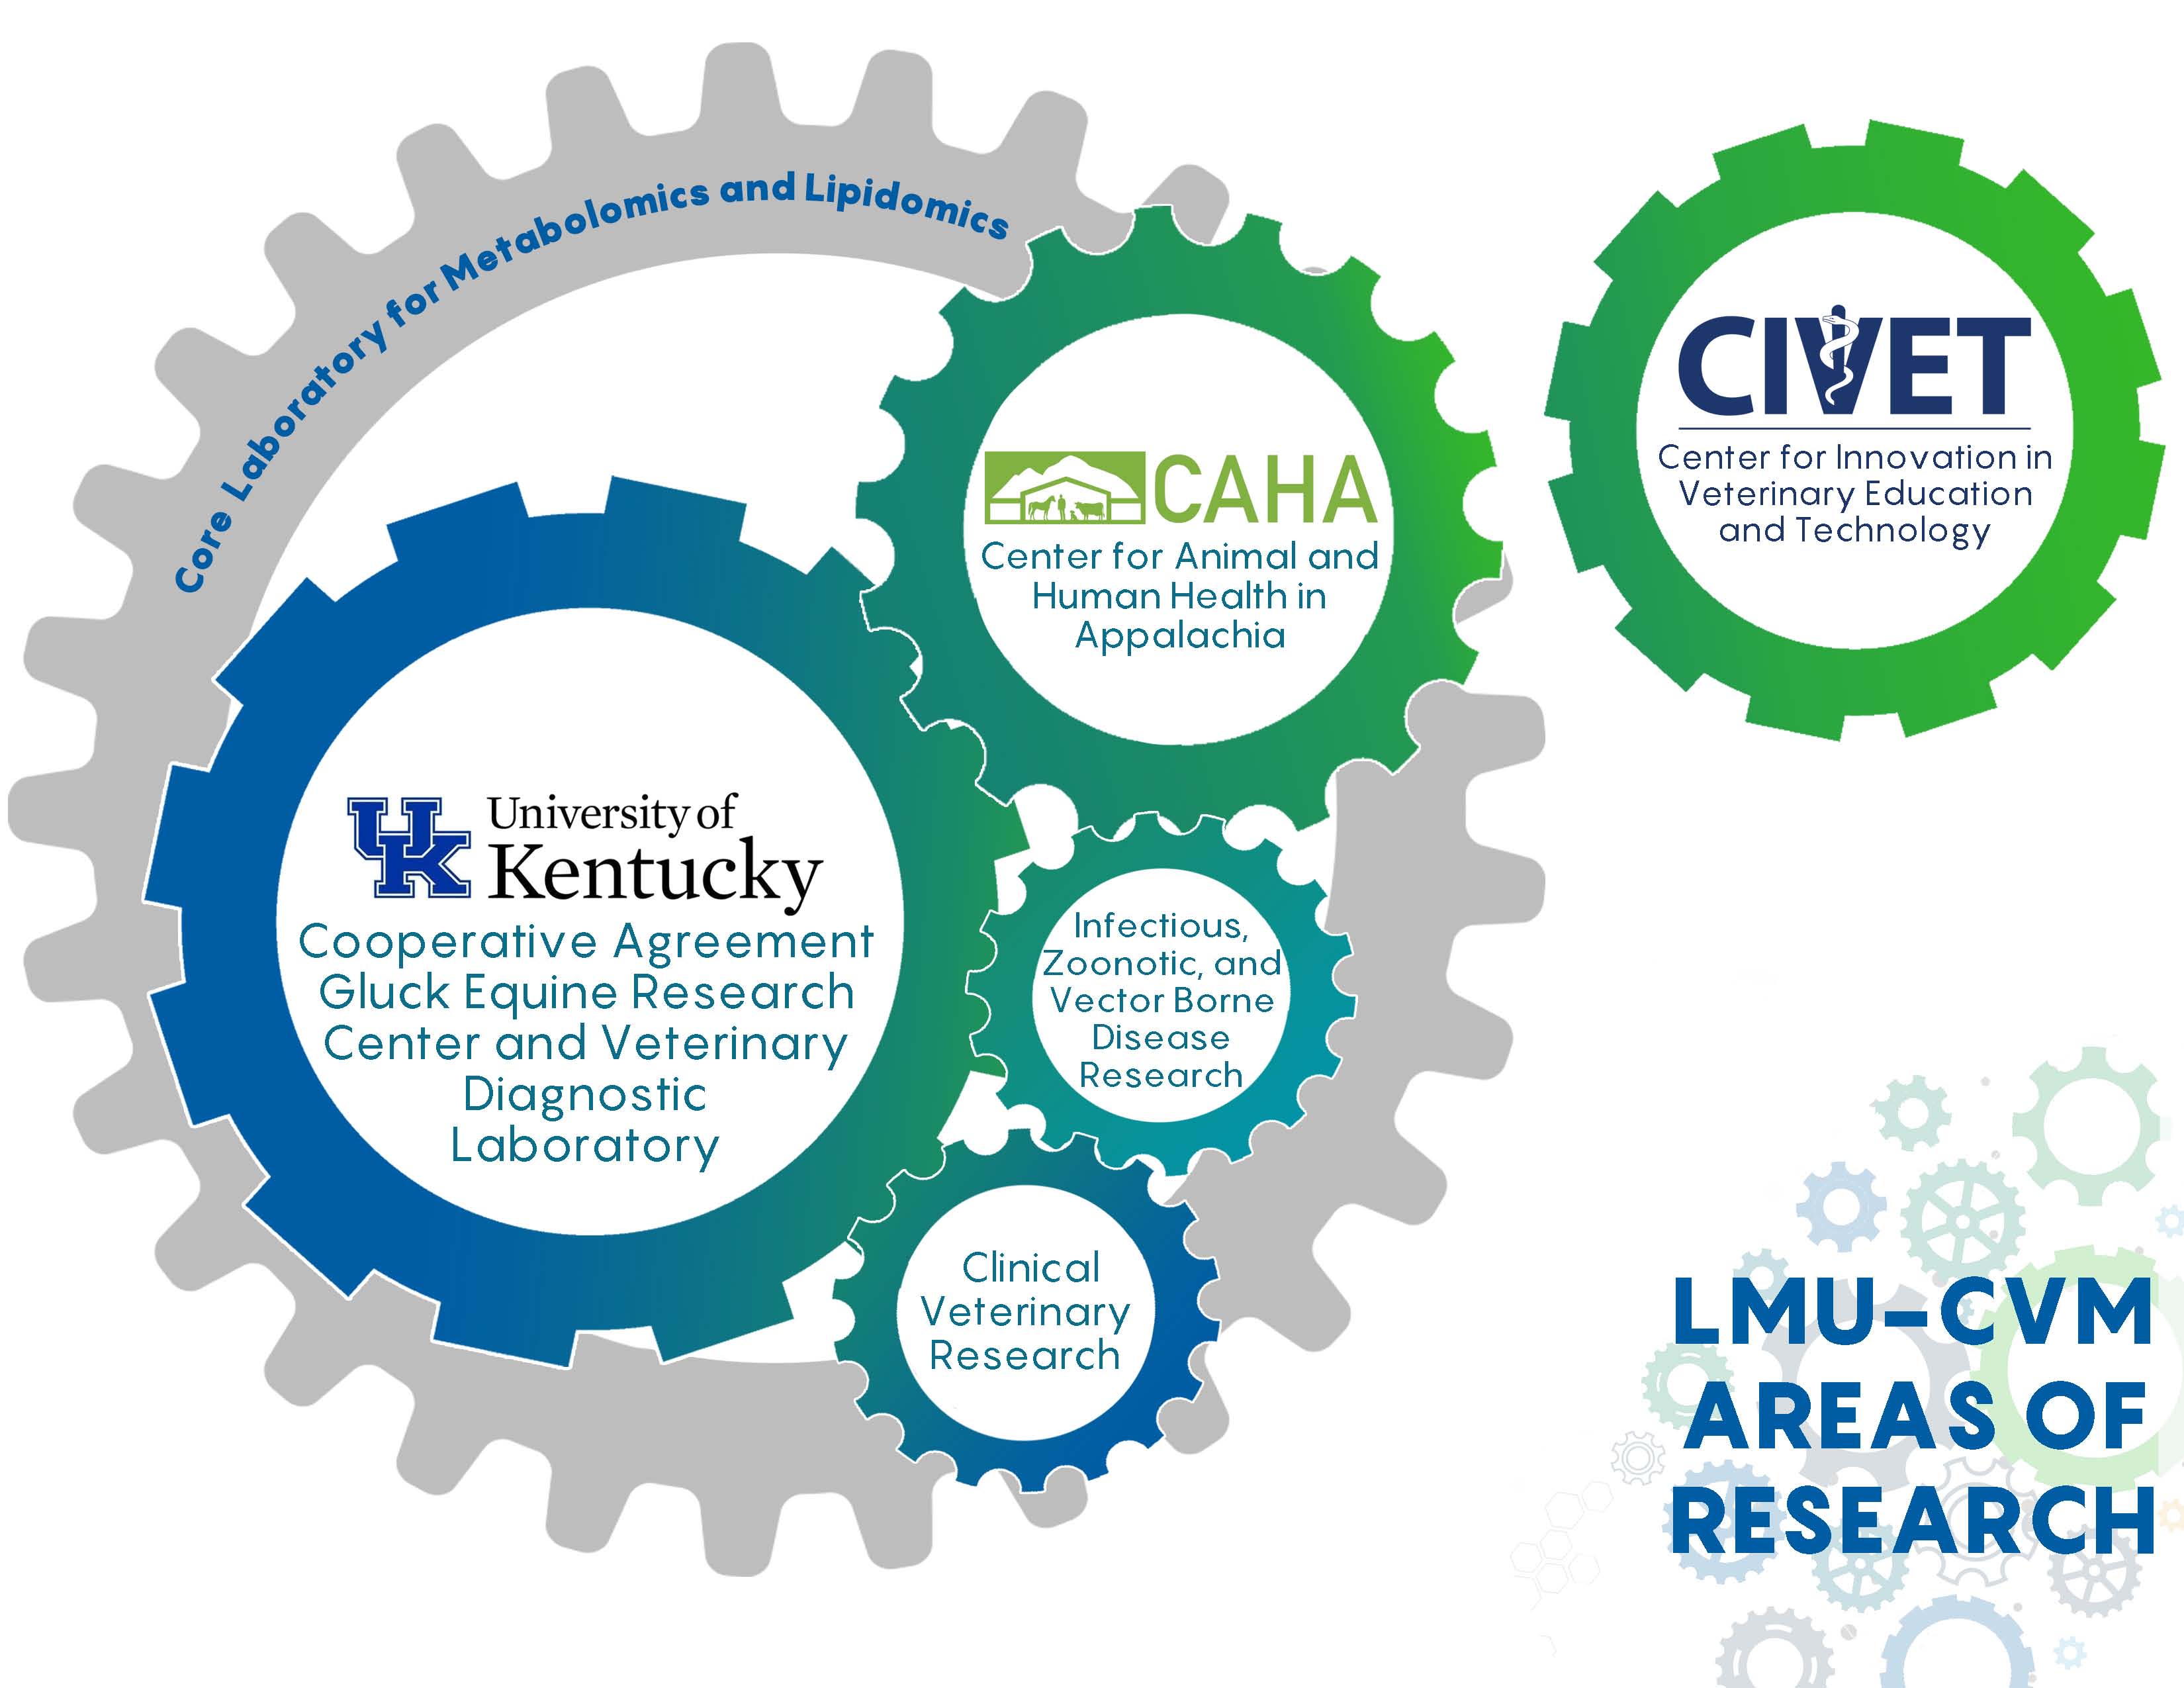 LMU CVM Areas of Research